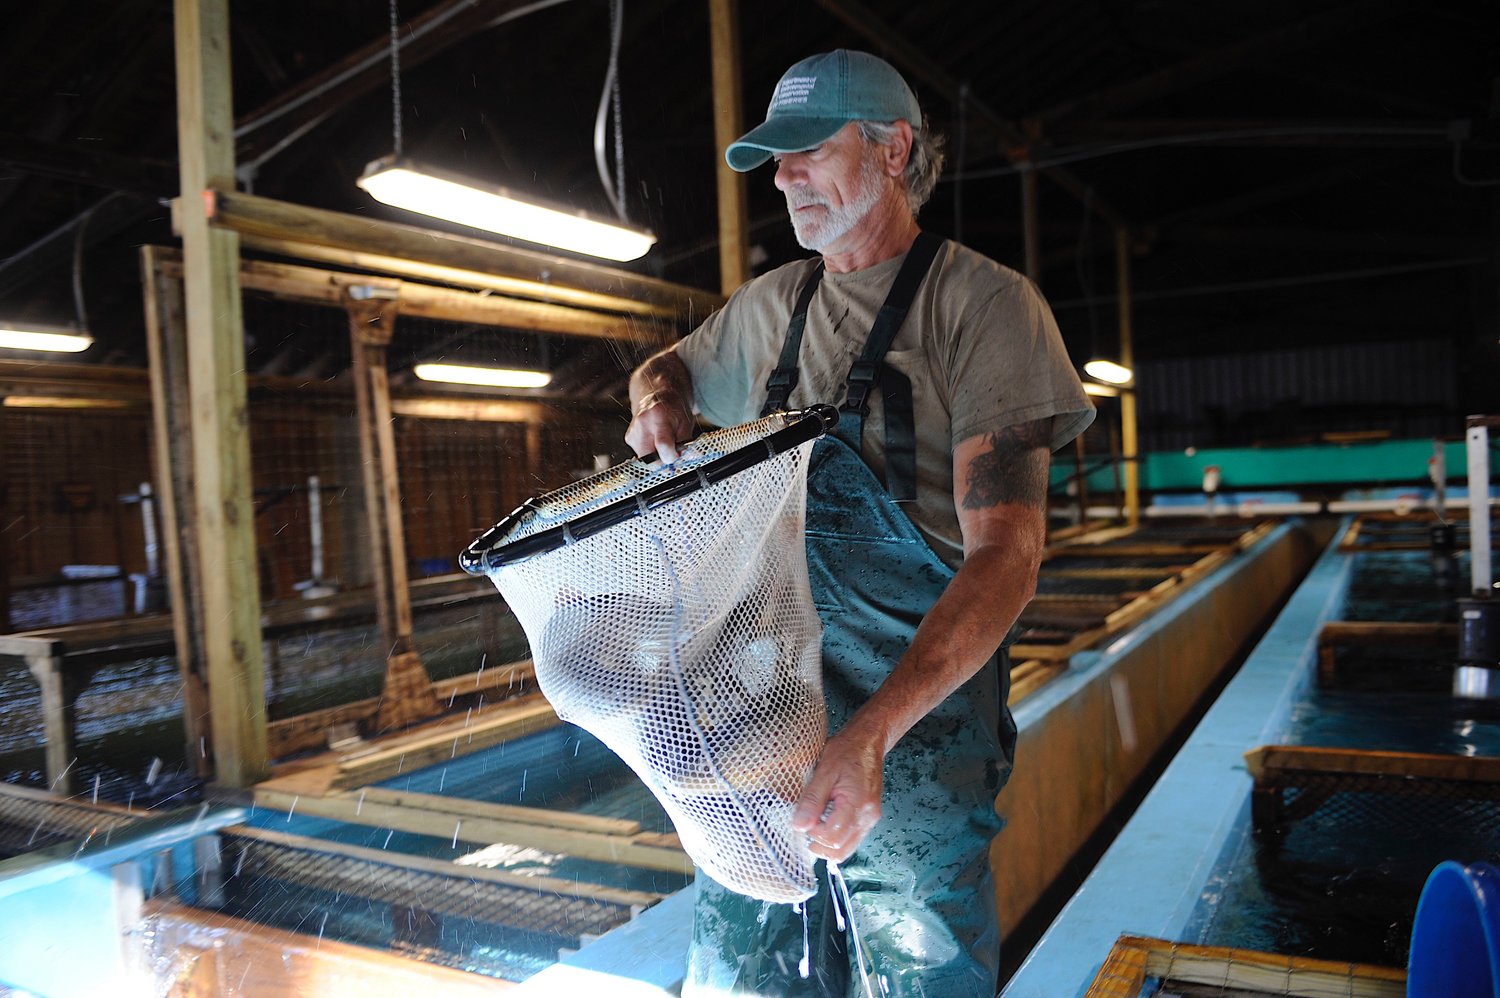 Tim Anstey, an avid outdoorsman, has worked at the local state fish hatchery for 24 years. He is pictured netting female brown trout during the process of gathering eggs and milt...